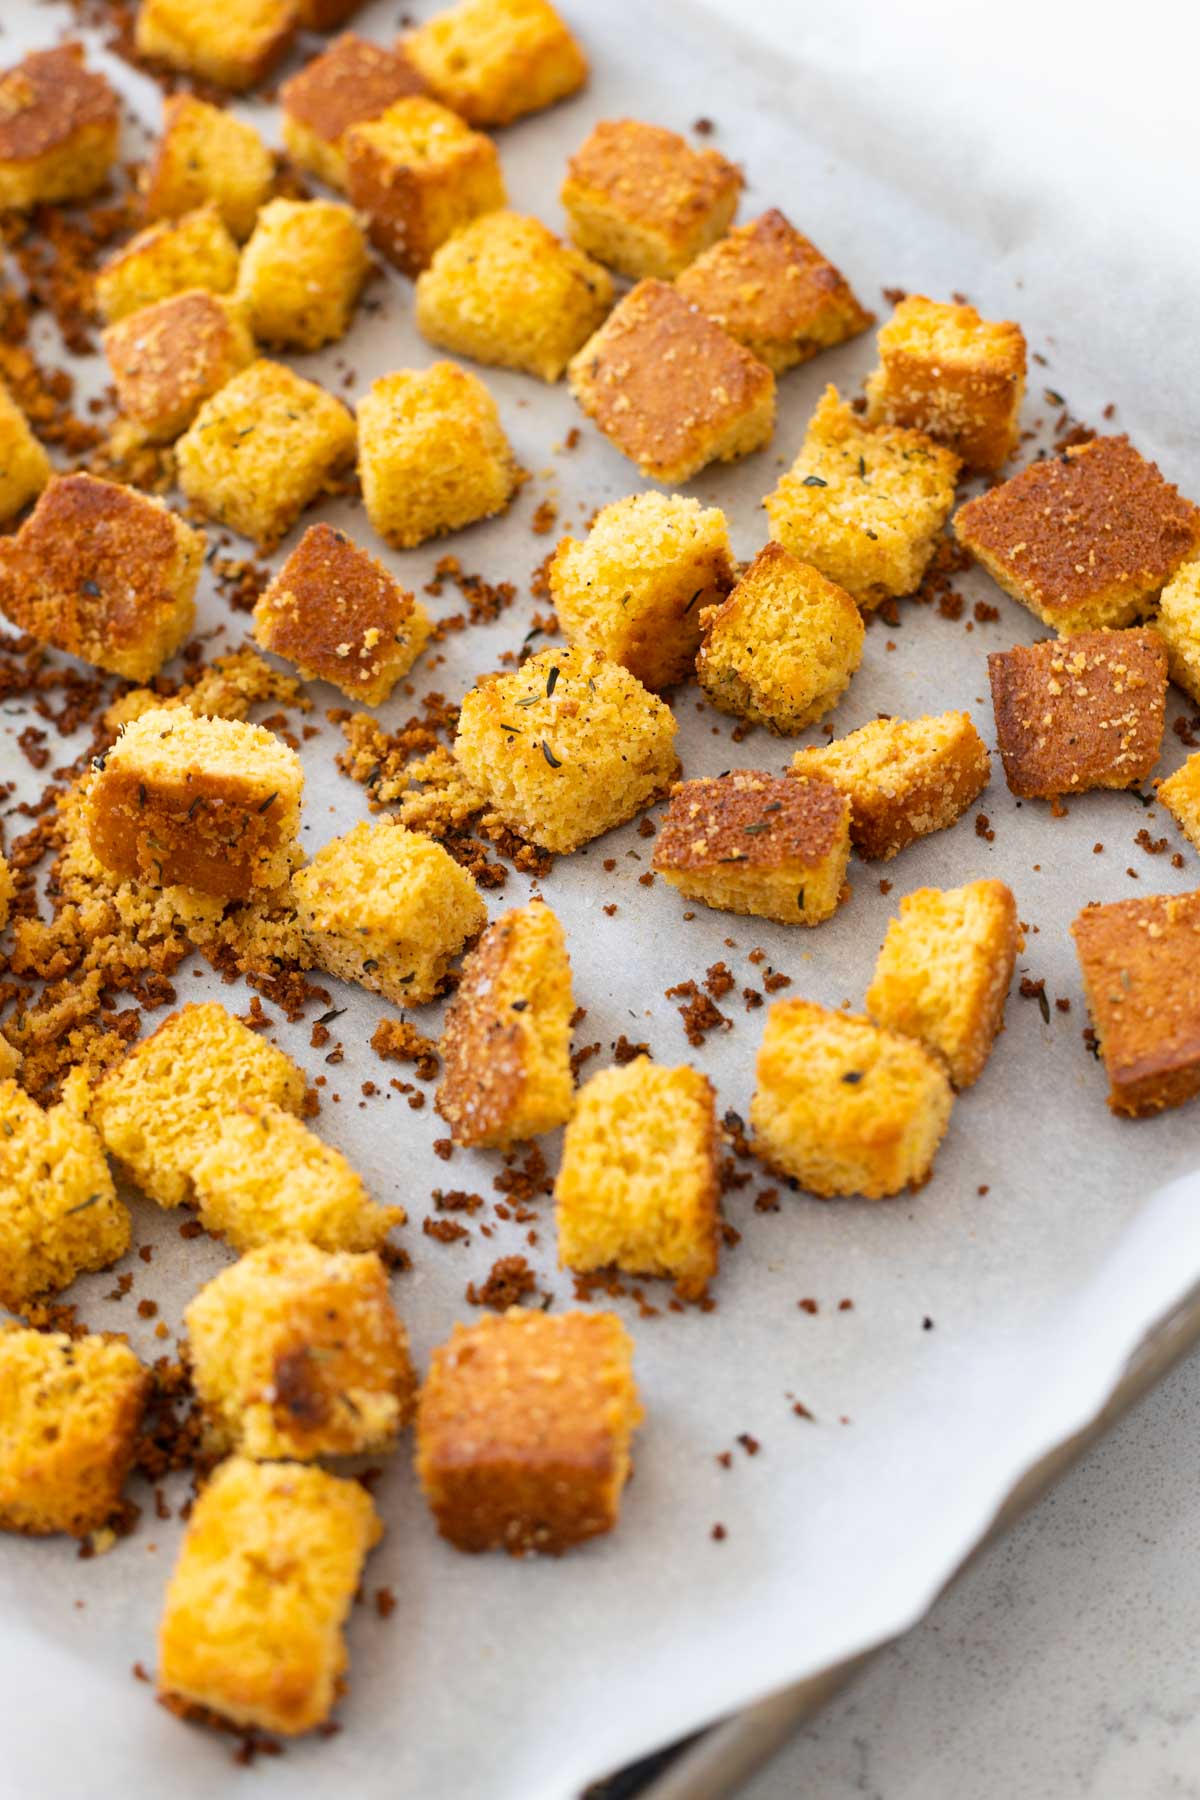 The finished cornbread croutons are cooling on the baking sheet.